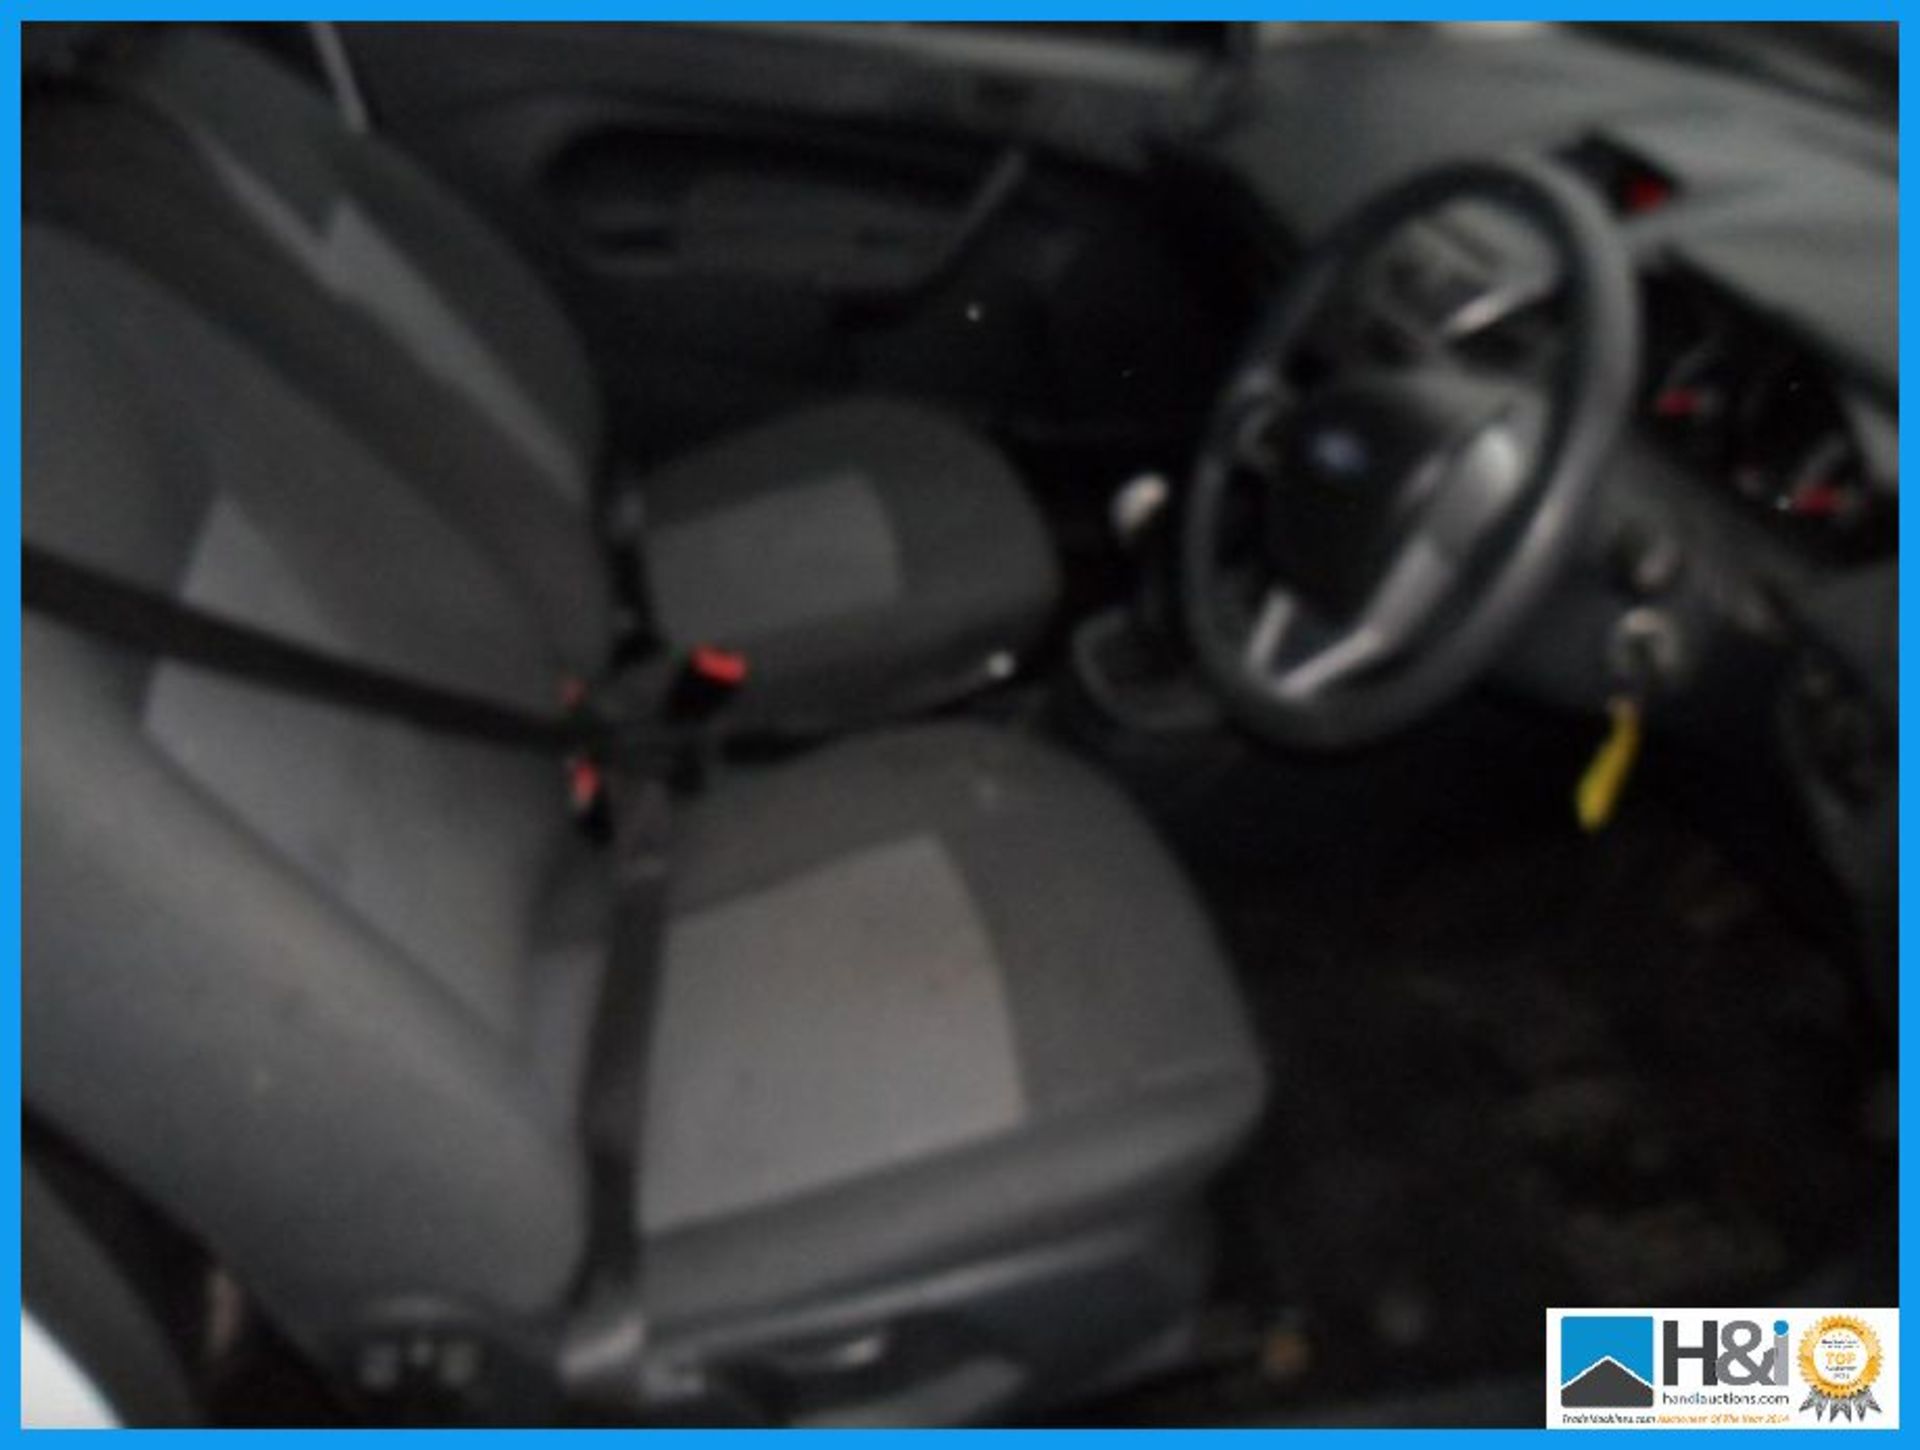 2011 FORD FIESTA BASE TDCI 1400, MOT: NOV 2016, MANUAL , SERVICE BOOK CAN BE SEEN , MILEAGE: 126,754 - Image 3 of 7